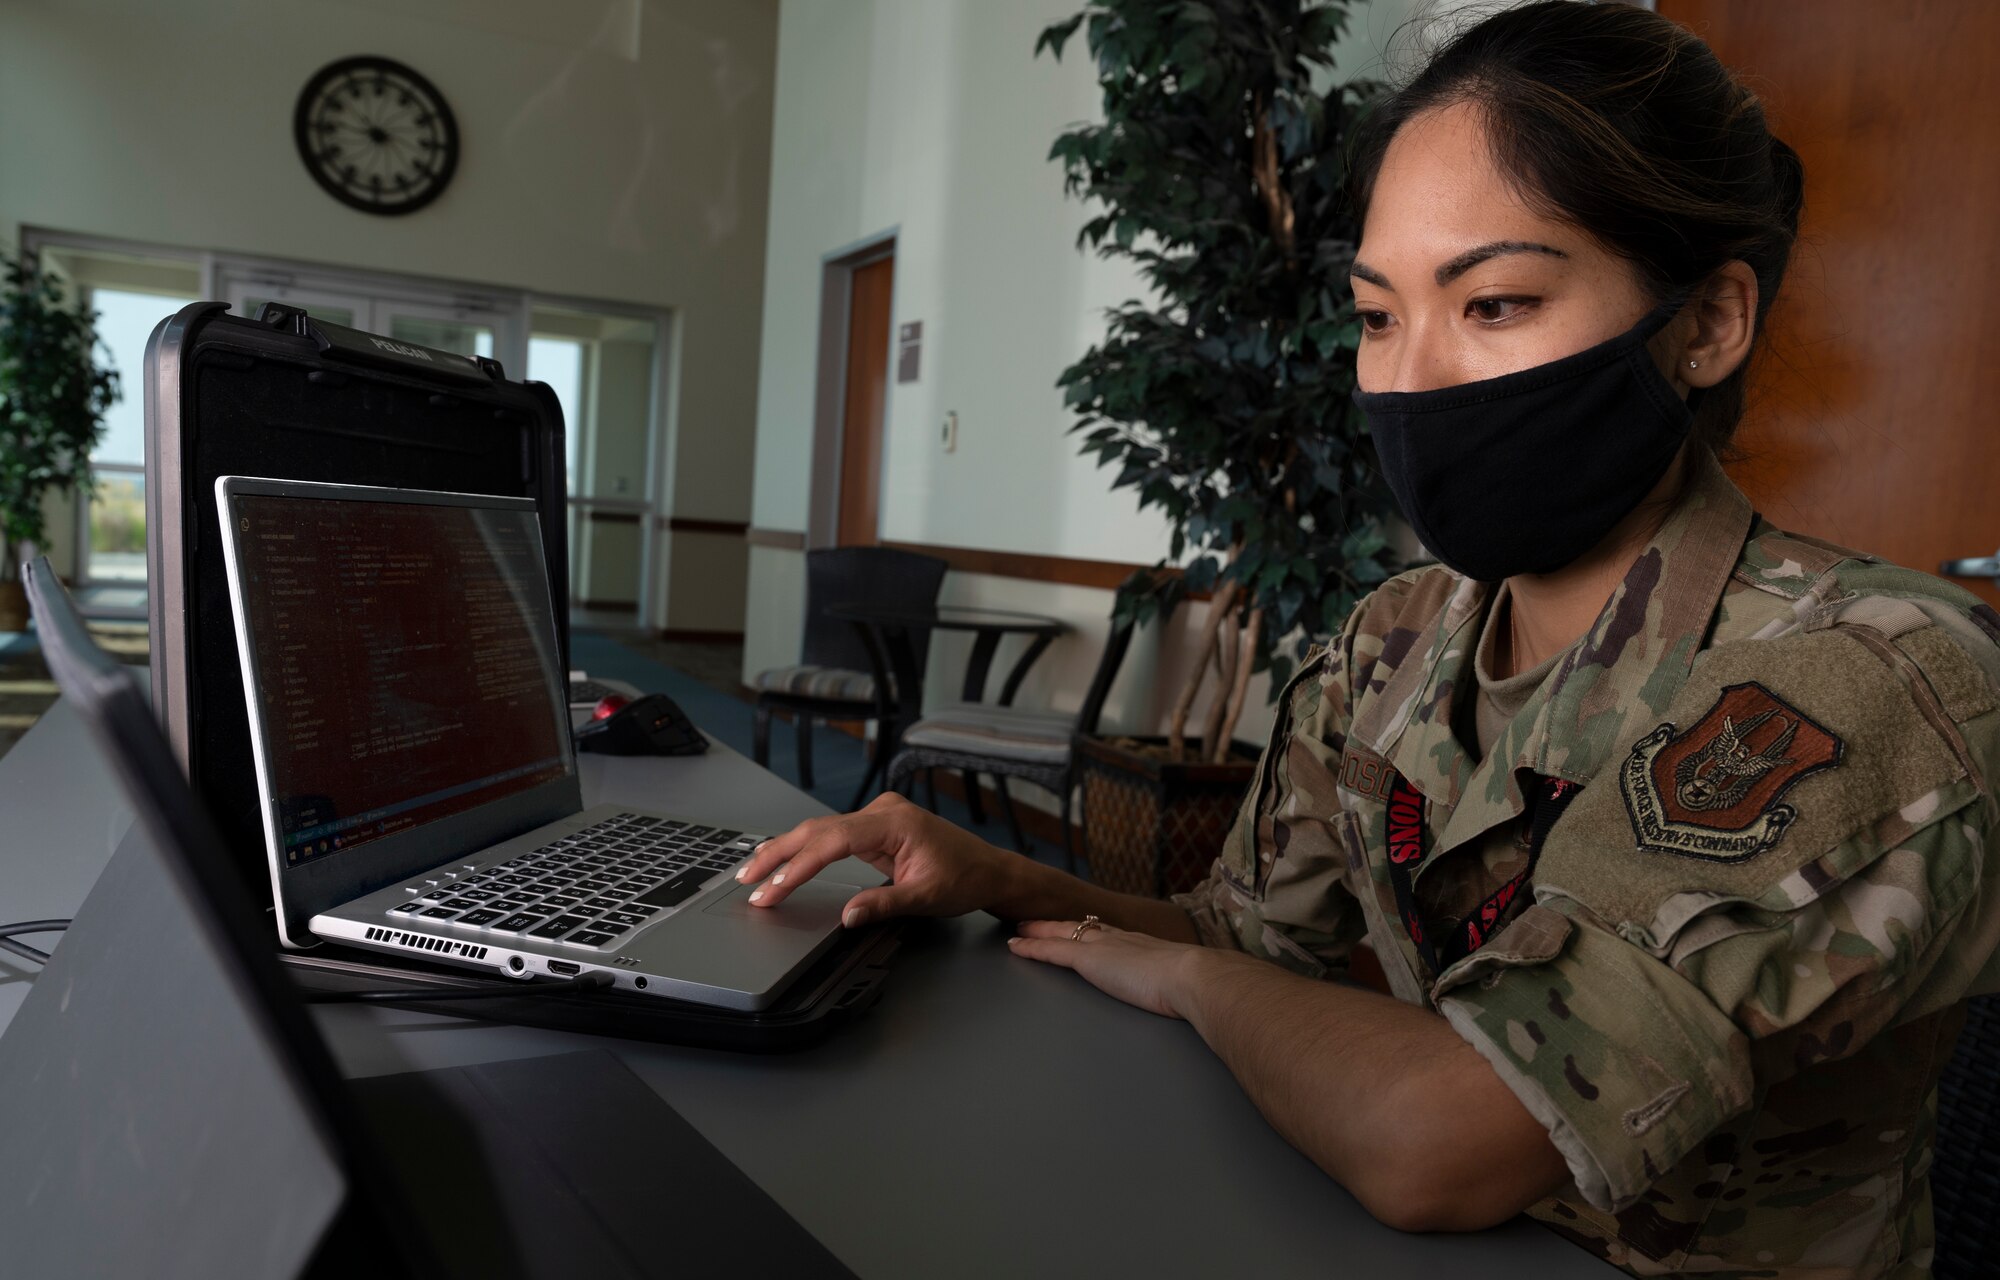 A woman wearing a facemask at a desk looks at a laptop.